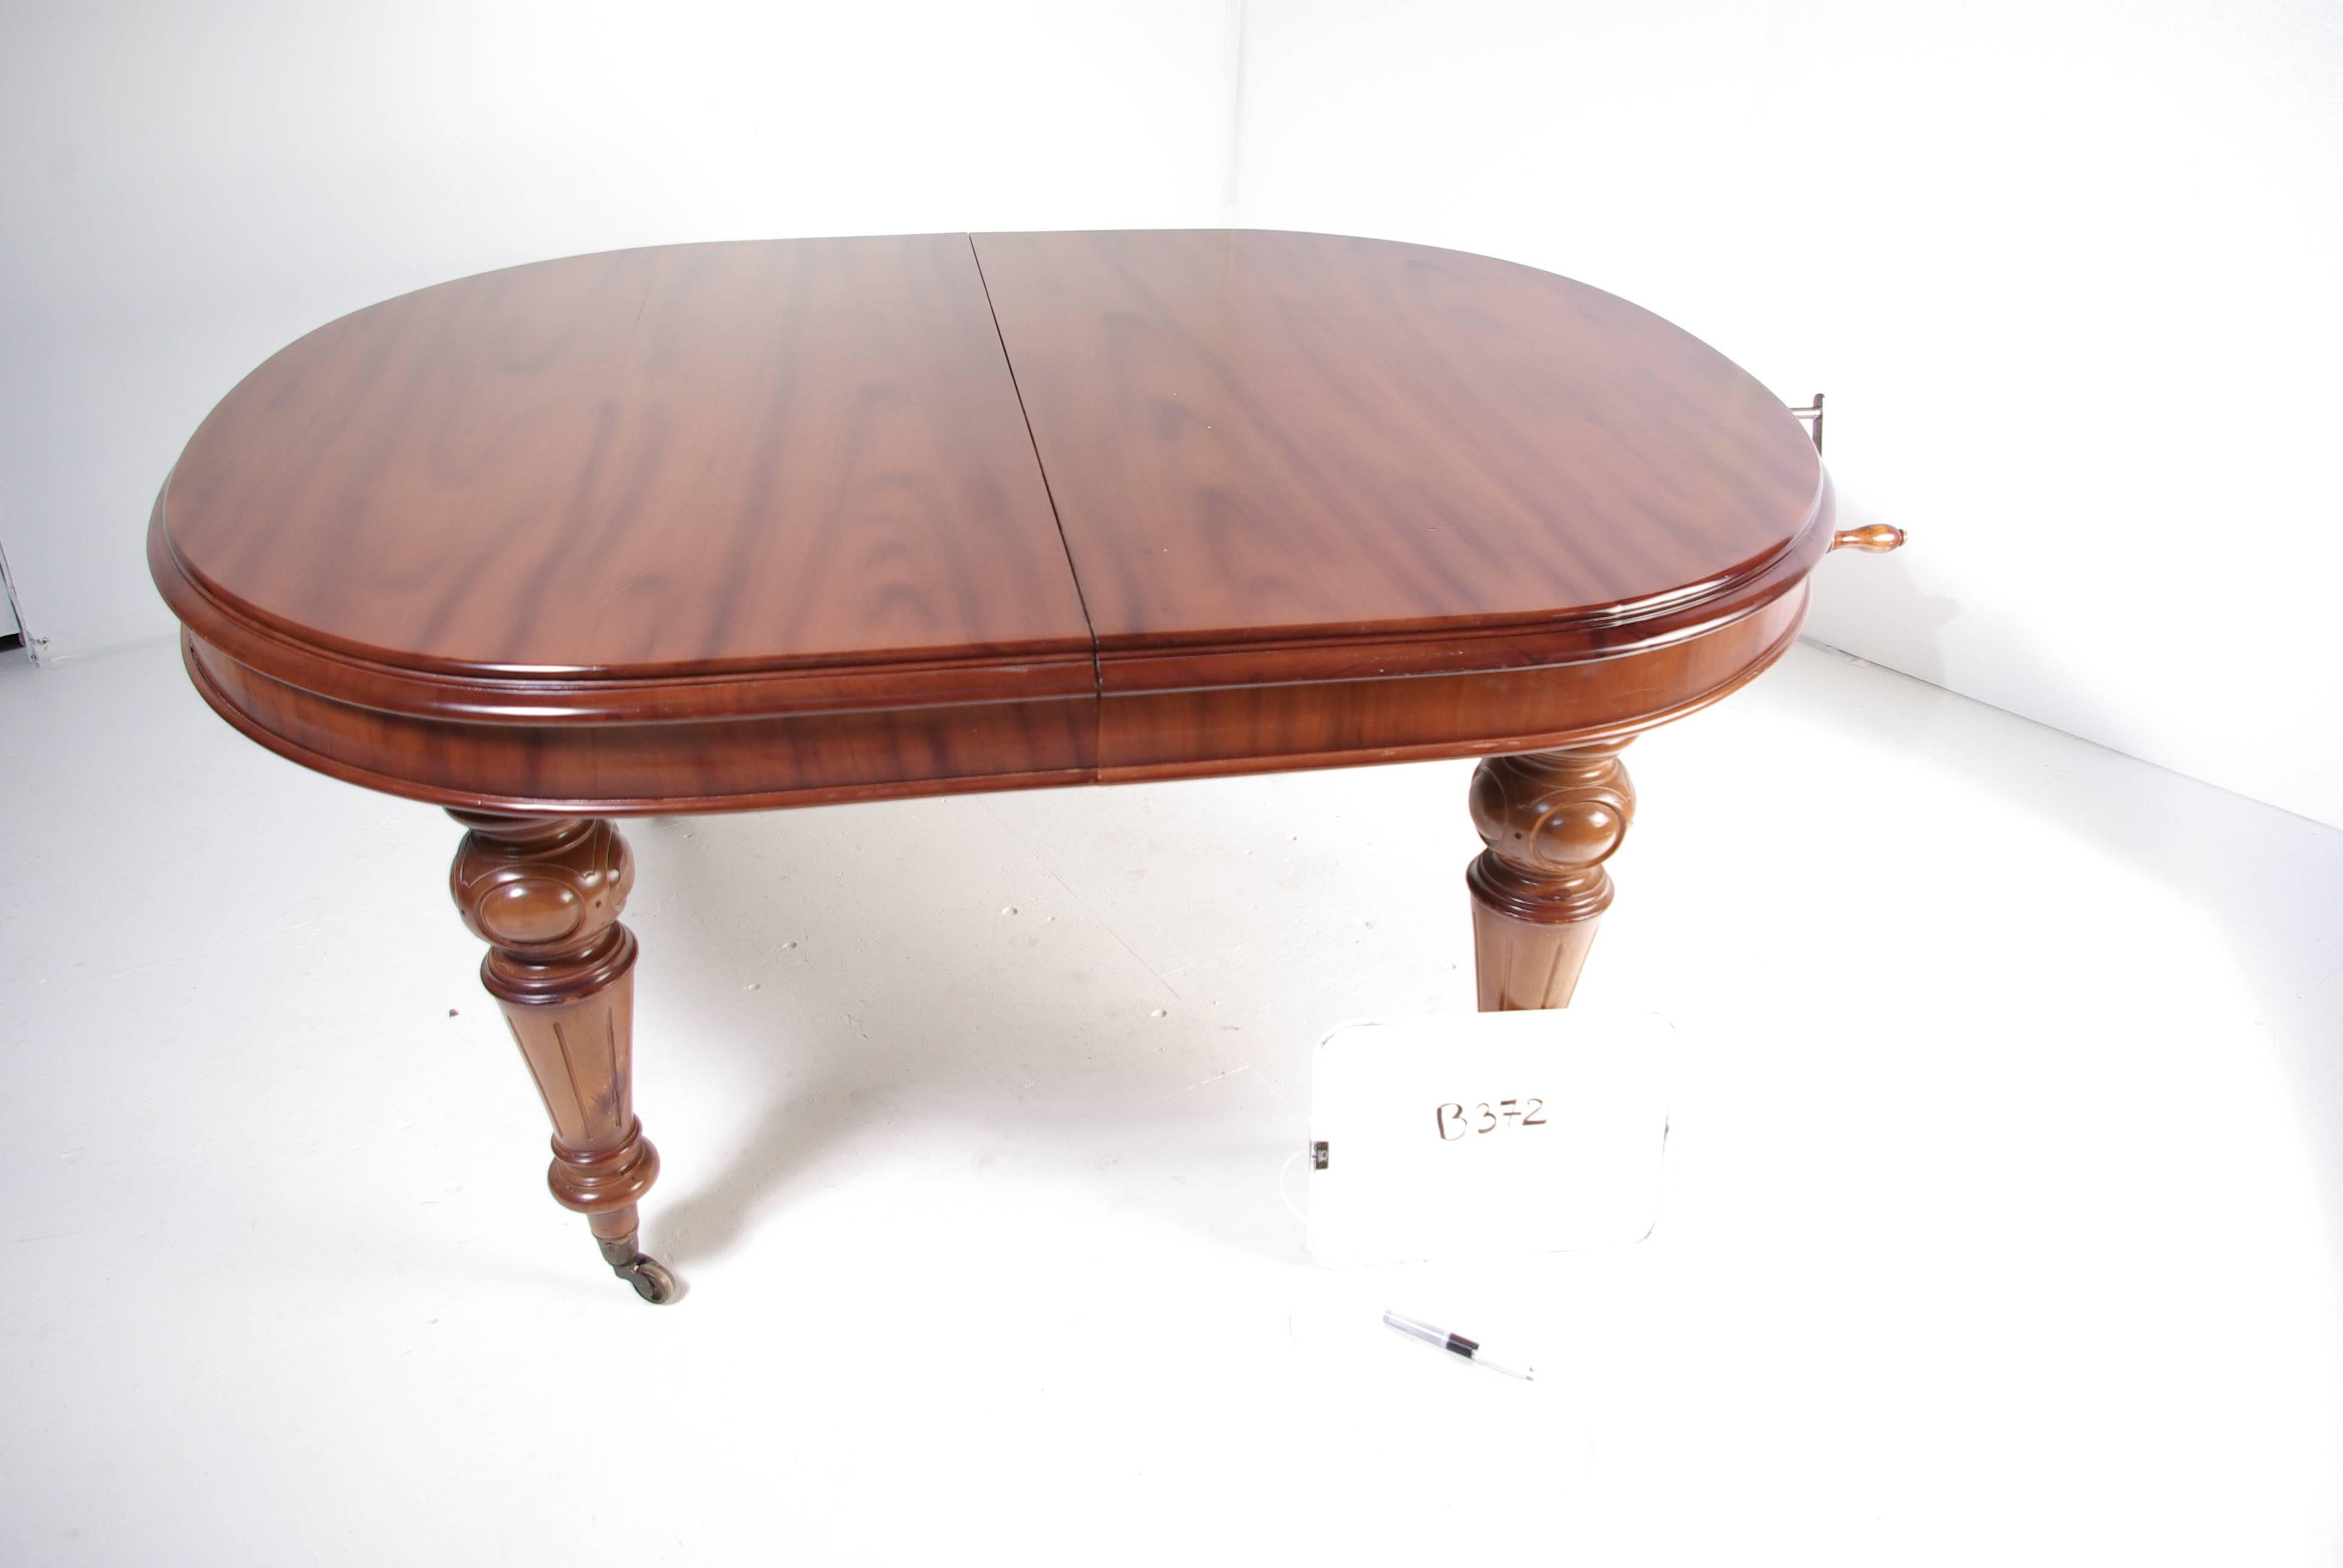 B372 antique Victorian mahogany oval dining room table with two leaves, hand crank,
Scotland, 1870.
Refinished in the last 30 years.
Comes with two Leaves at 15.5" wide each.
Crank to wind and unwind.
Oval shaped.
Ends on reeded legs with